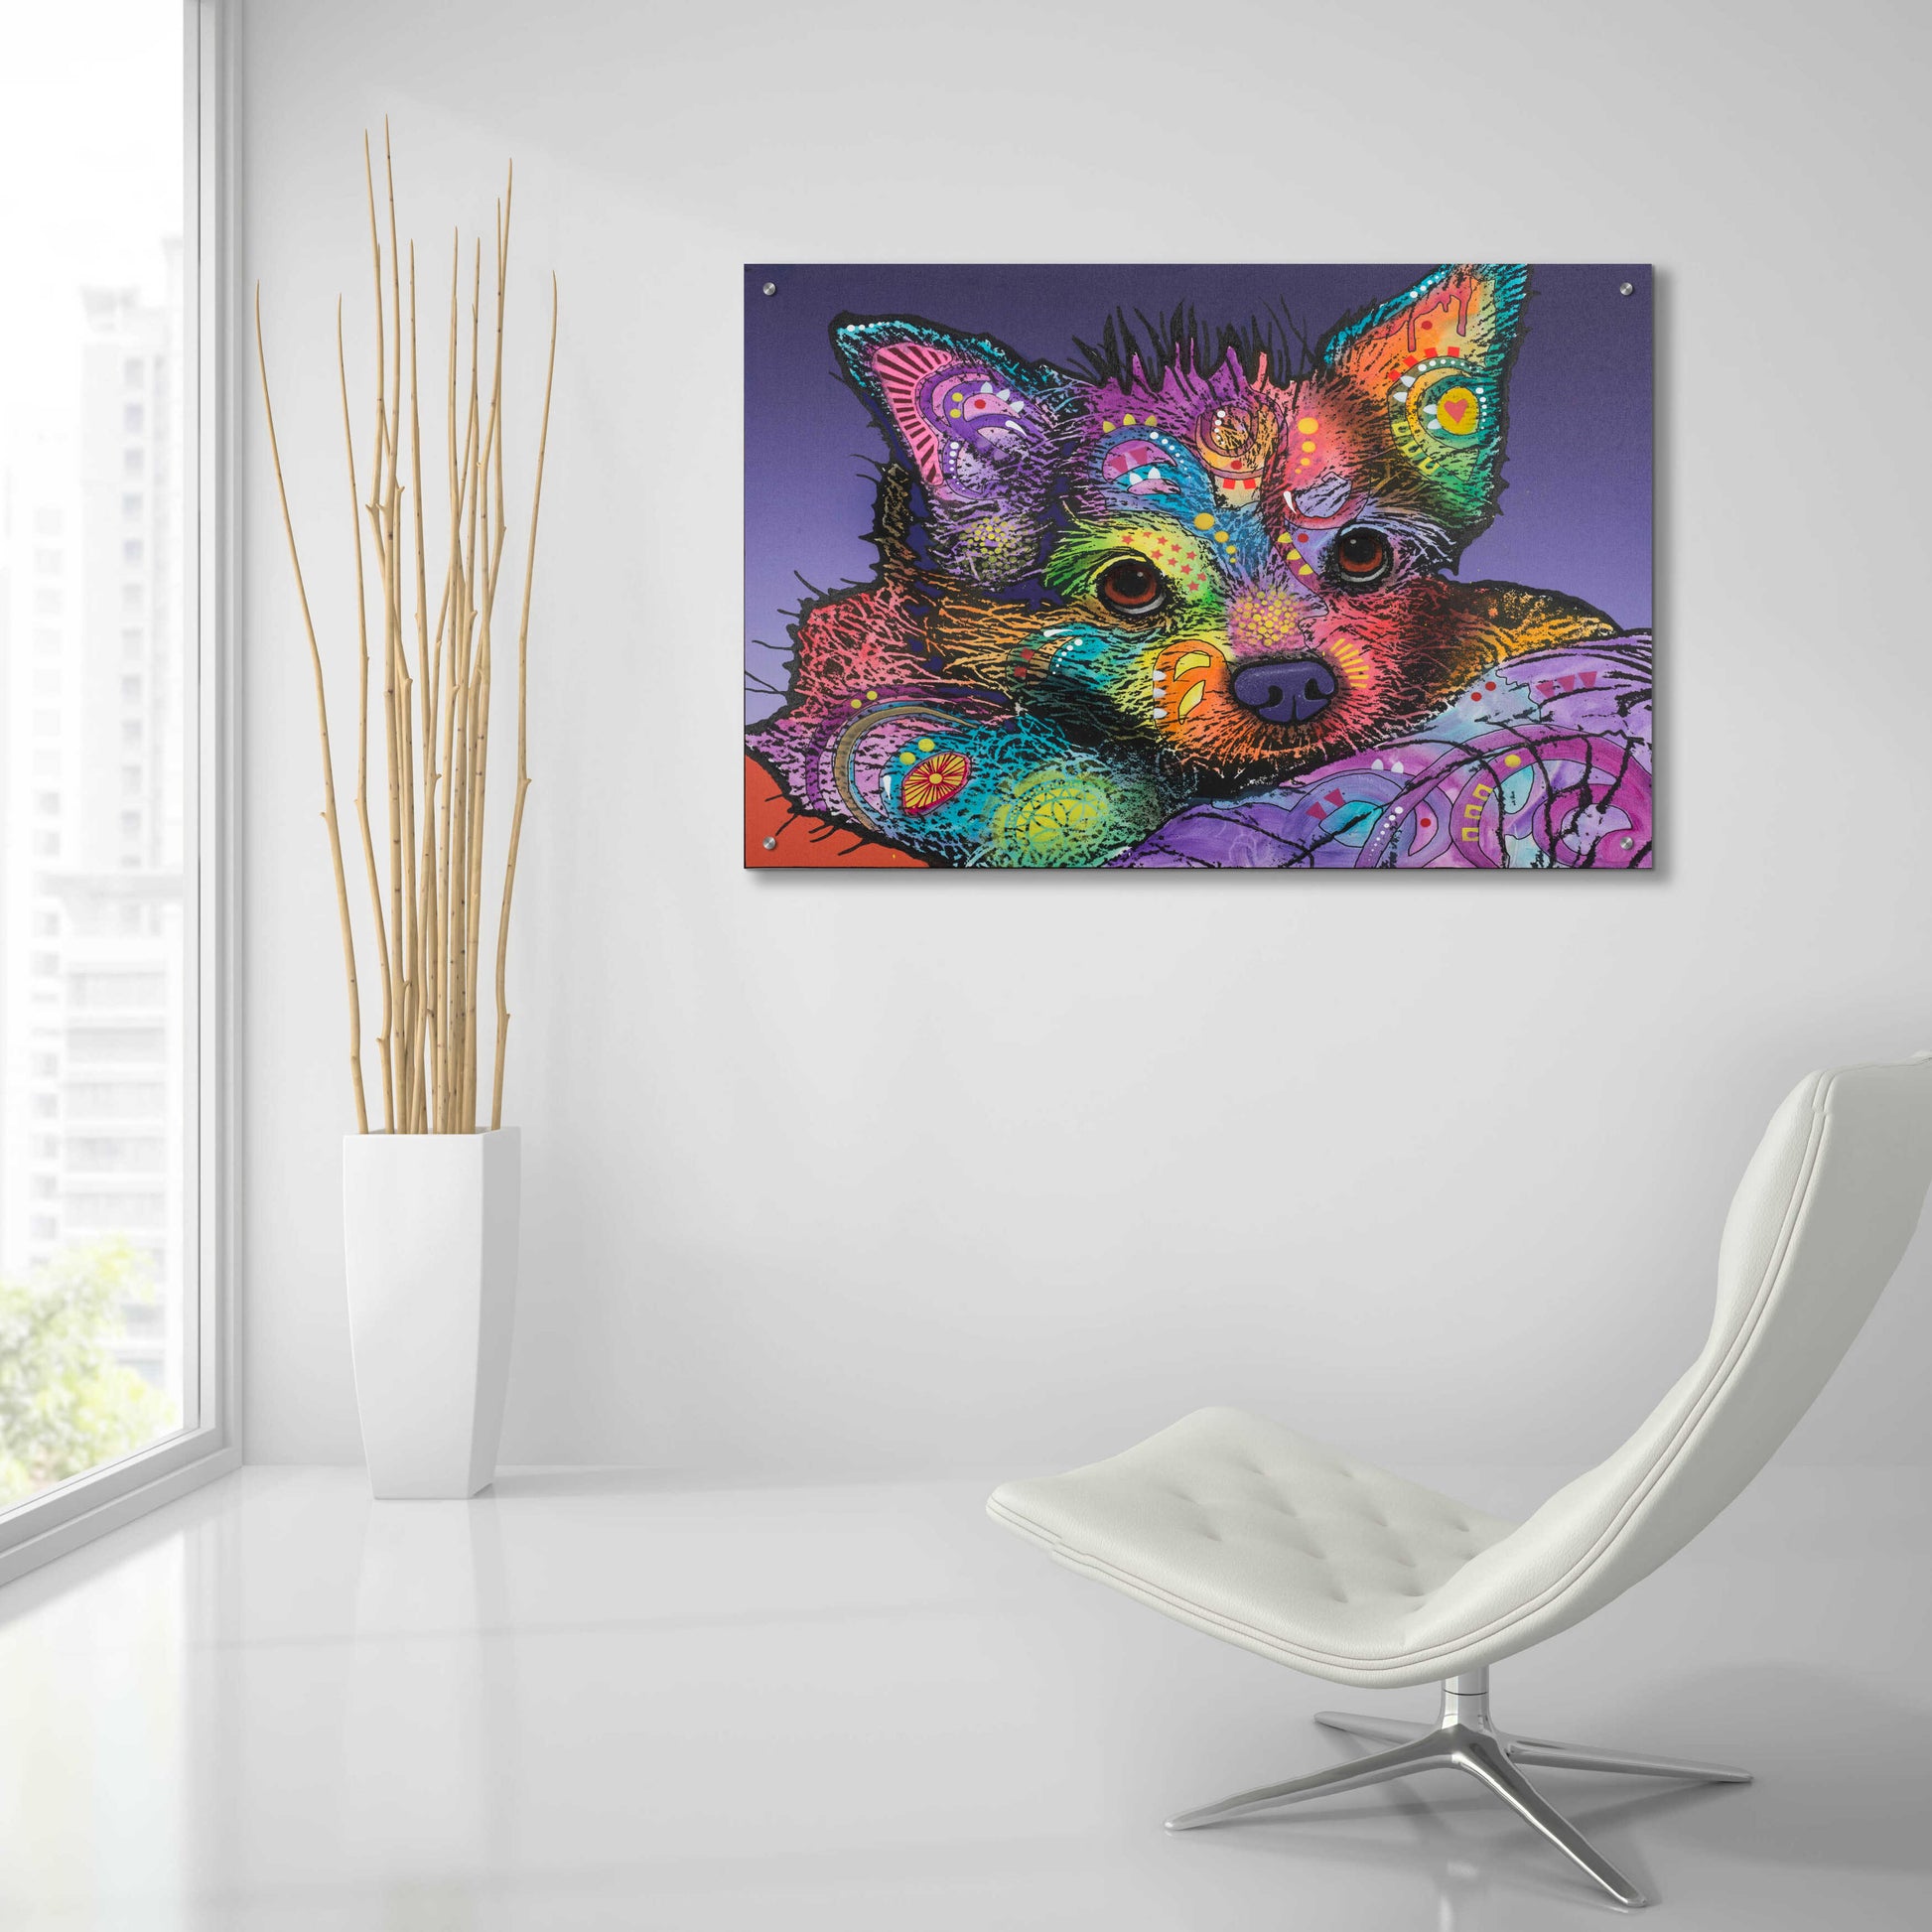 Epic Art 'Romeo' by Dean Russo, Acrylic Glass Wall Art,36x24